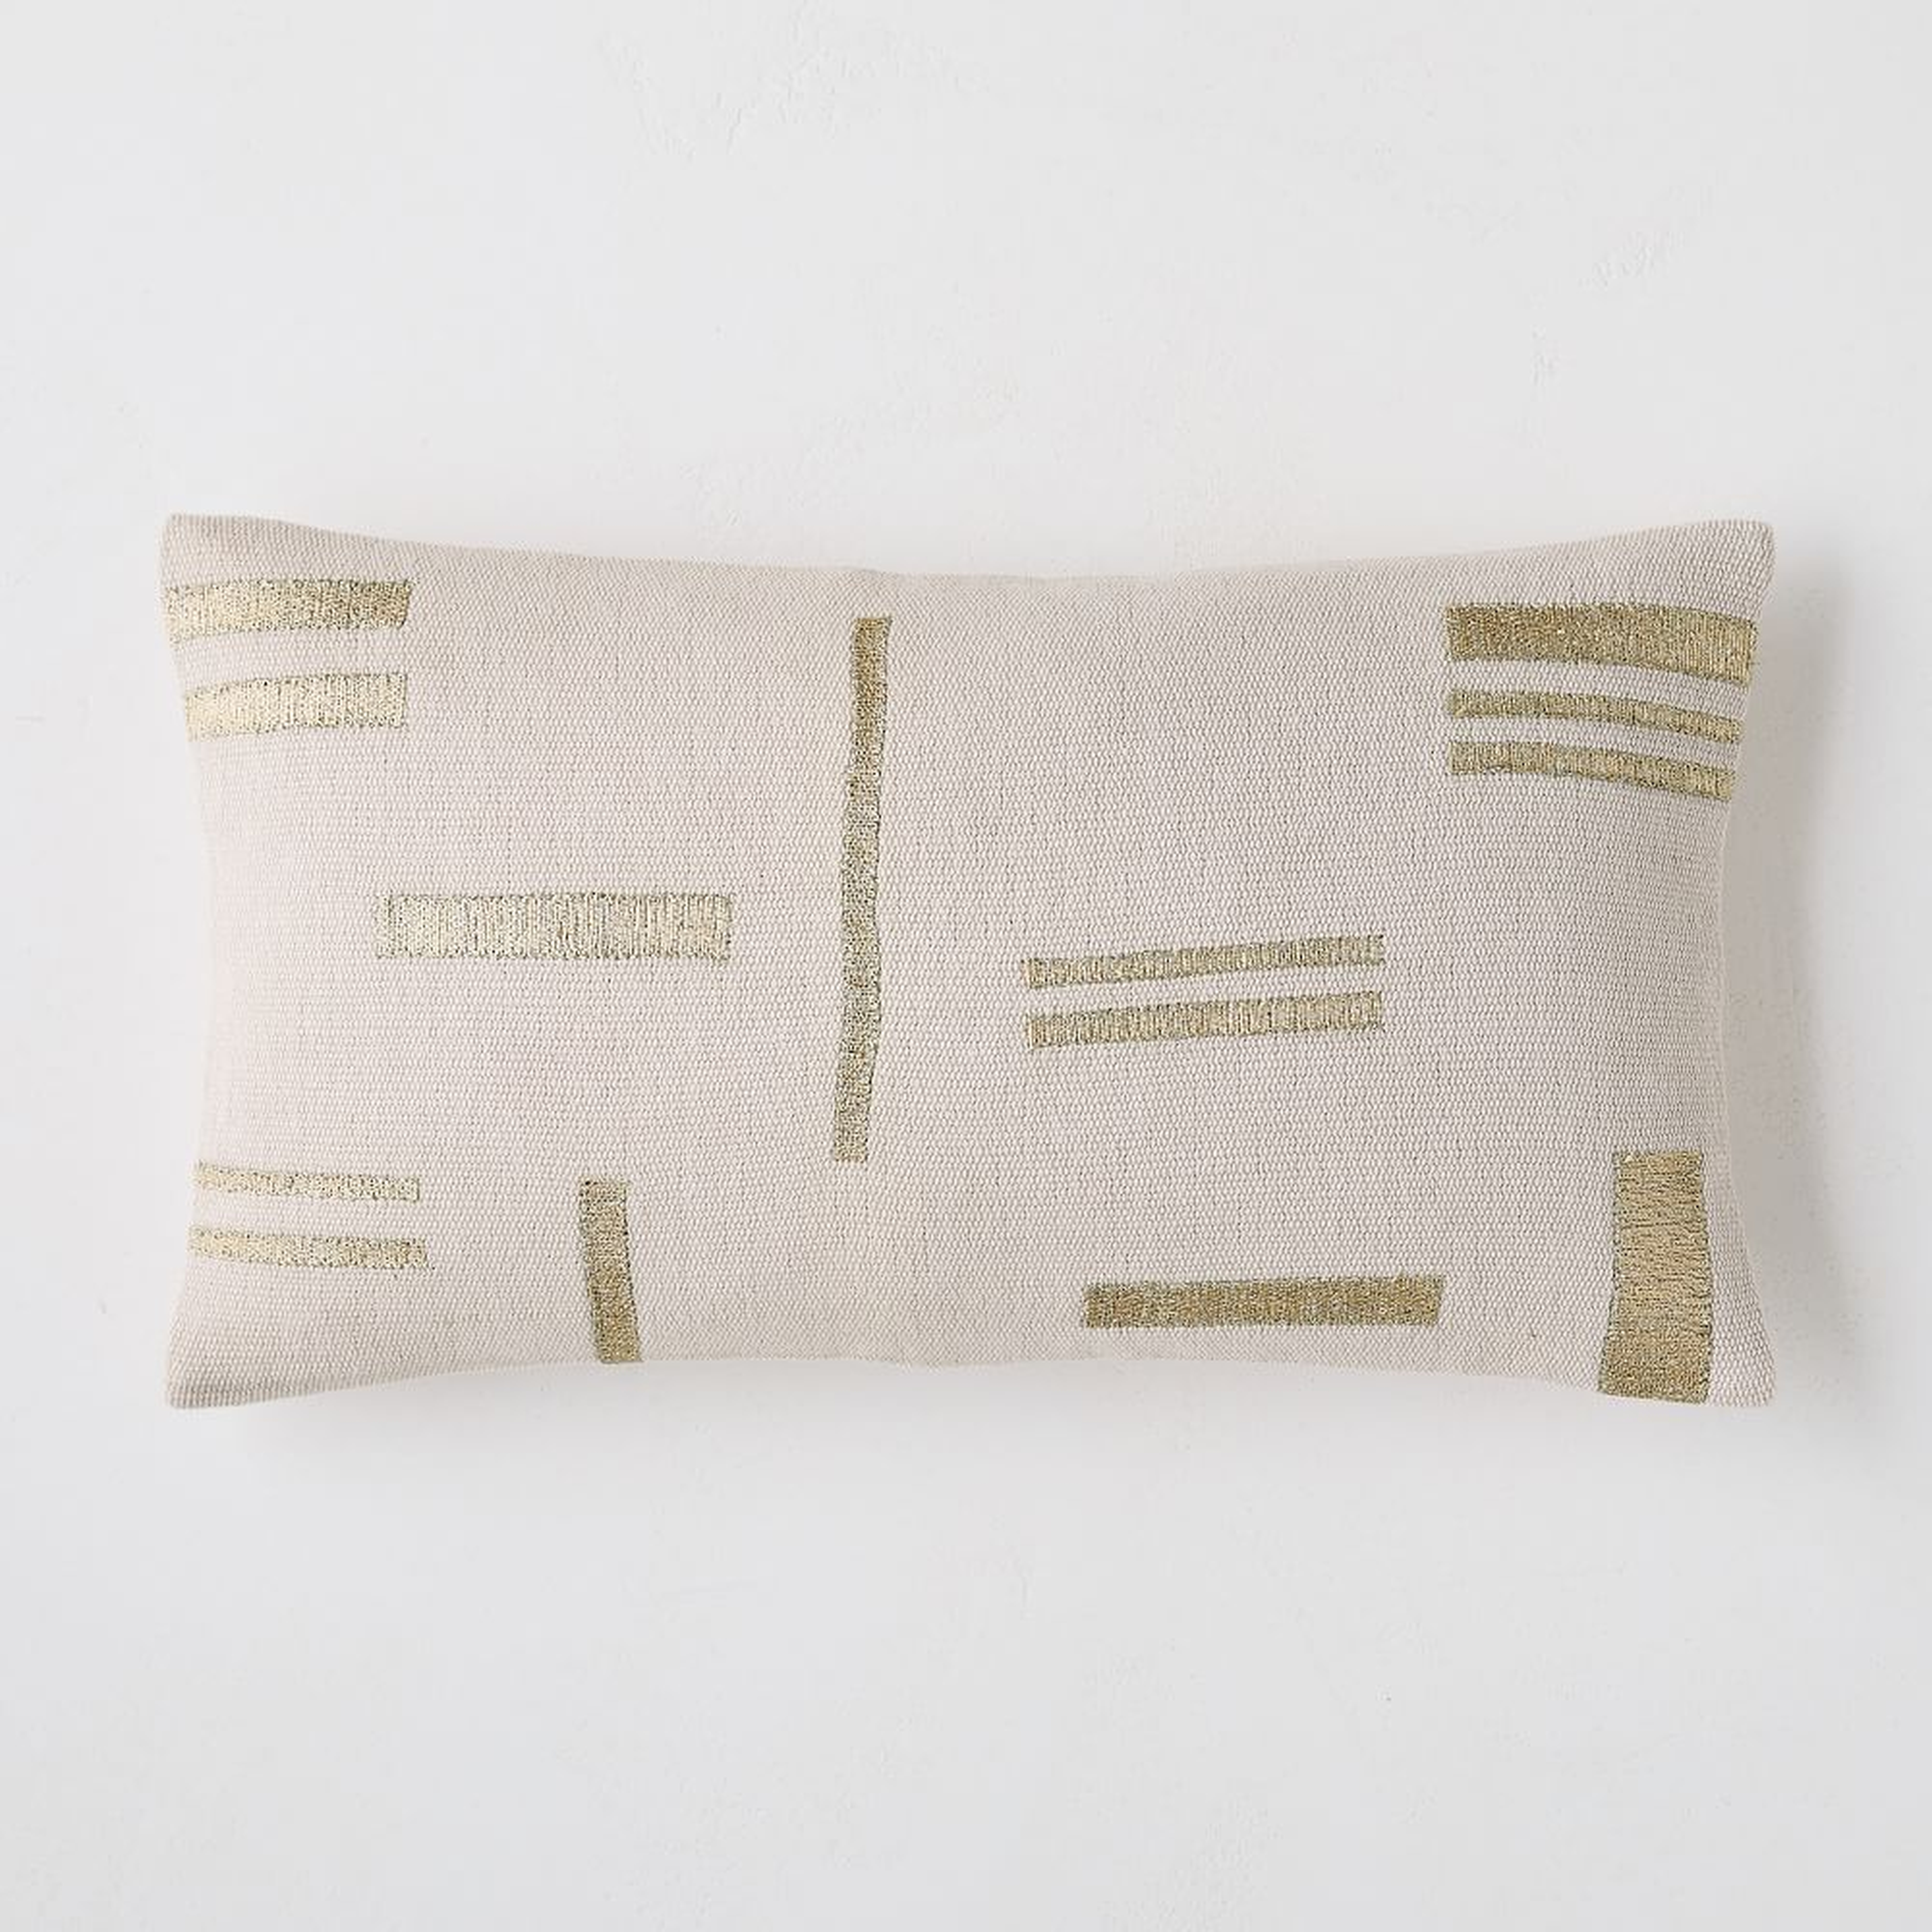 Embroidered Metallic Blocks Pillow Cover, 12"x21", Natural - West Elm